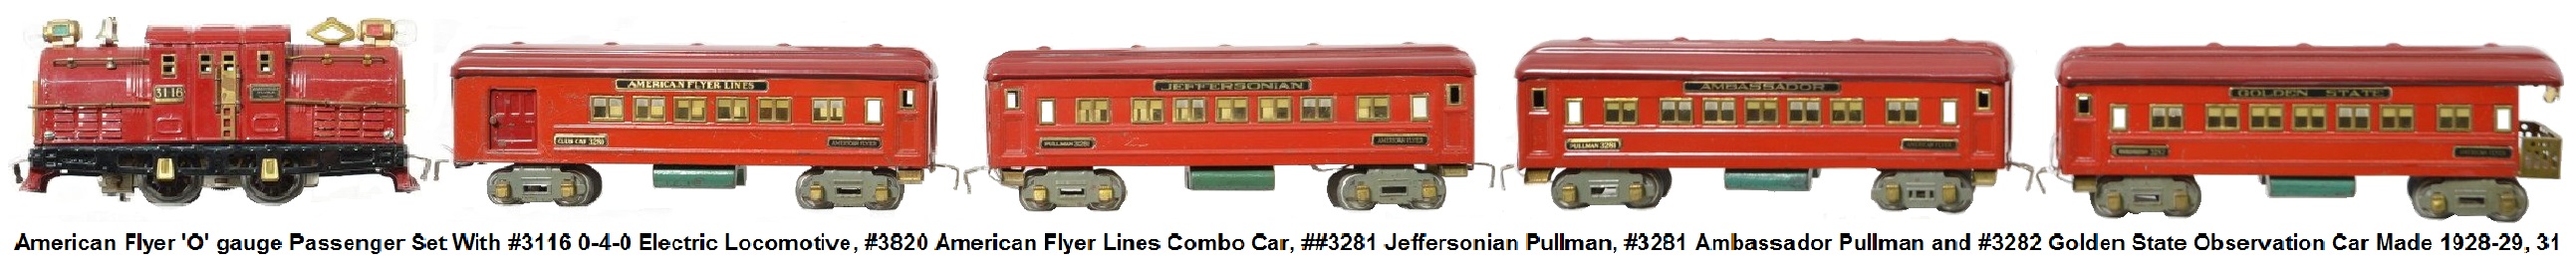 American Flyer 'O' gauge Passenger set with #3116 0-4-0 electric Outline Loco, #3280 American Flyer Lines Club Car, #3281 Jeffersonian Pullman, #3281 Ambassador Pullman and #3282 Golden State Observation Car made 1928-29, 31